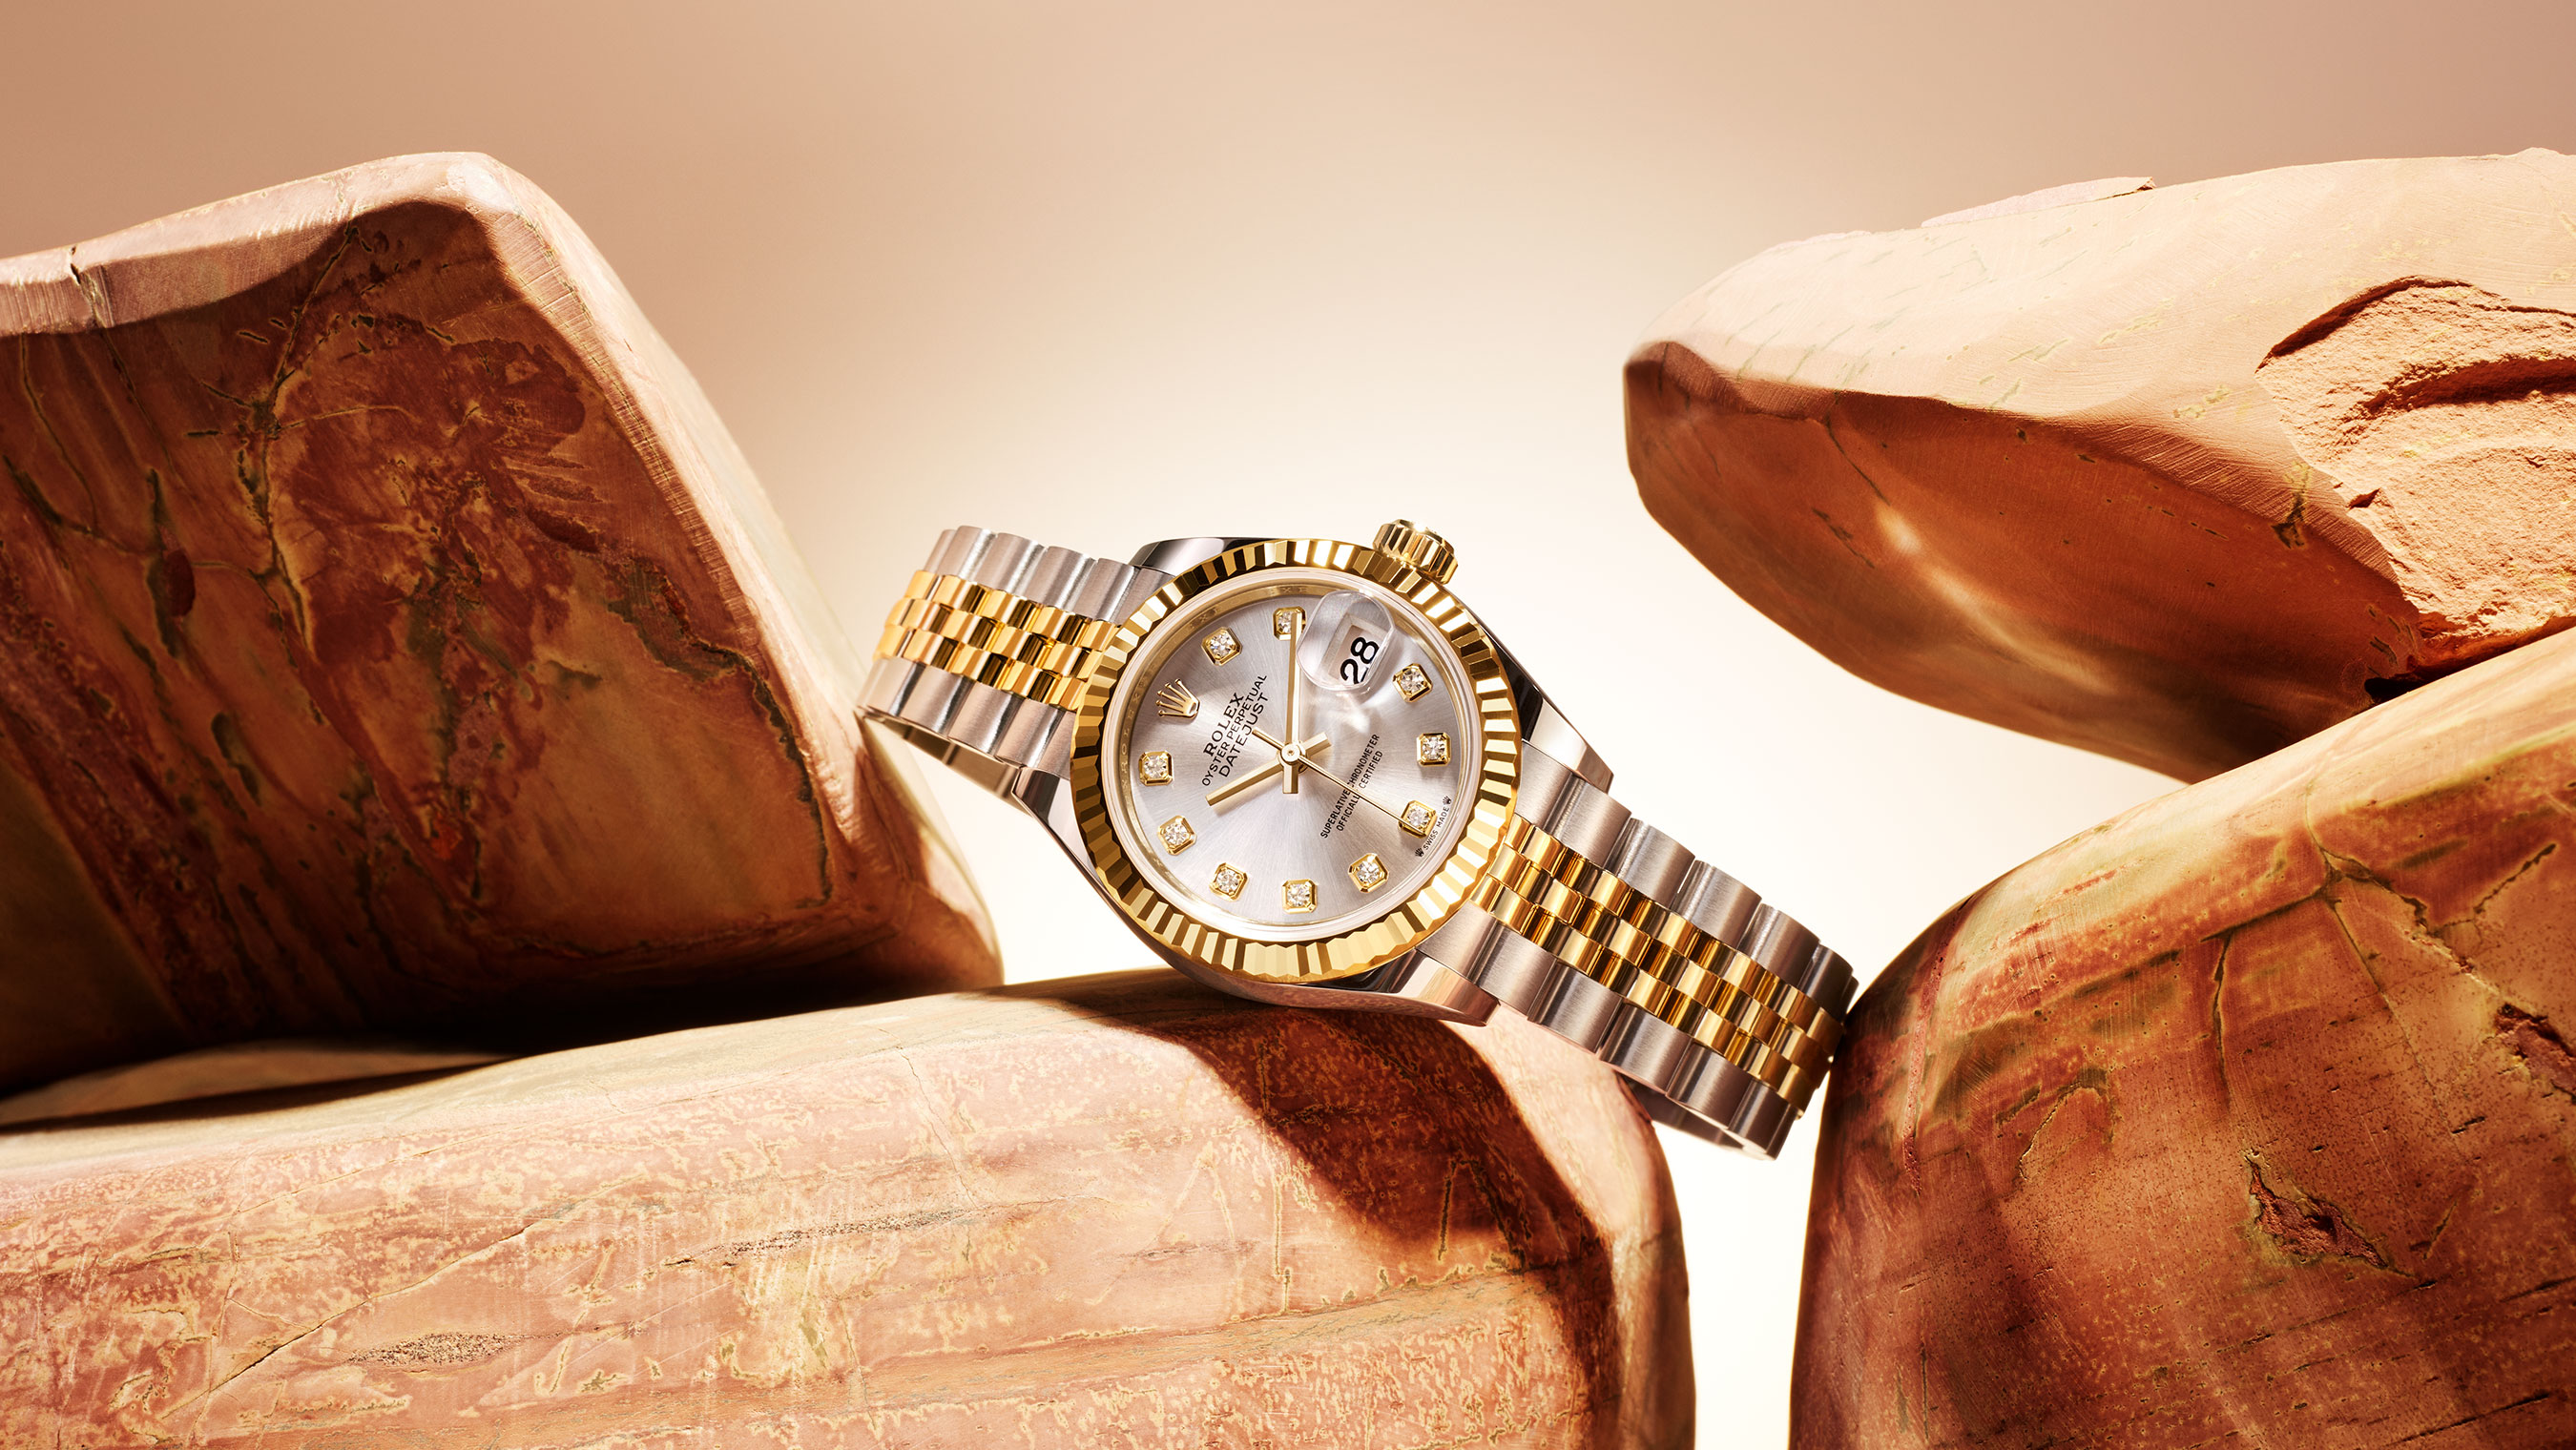 The Rolex Lady-Datejust